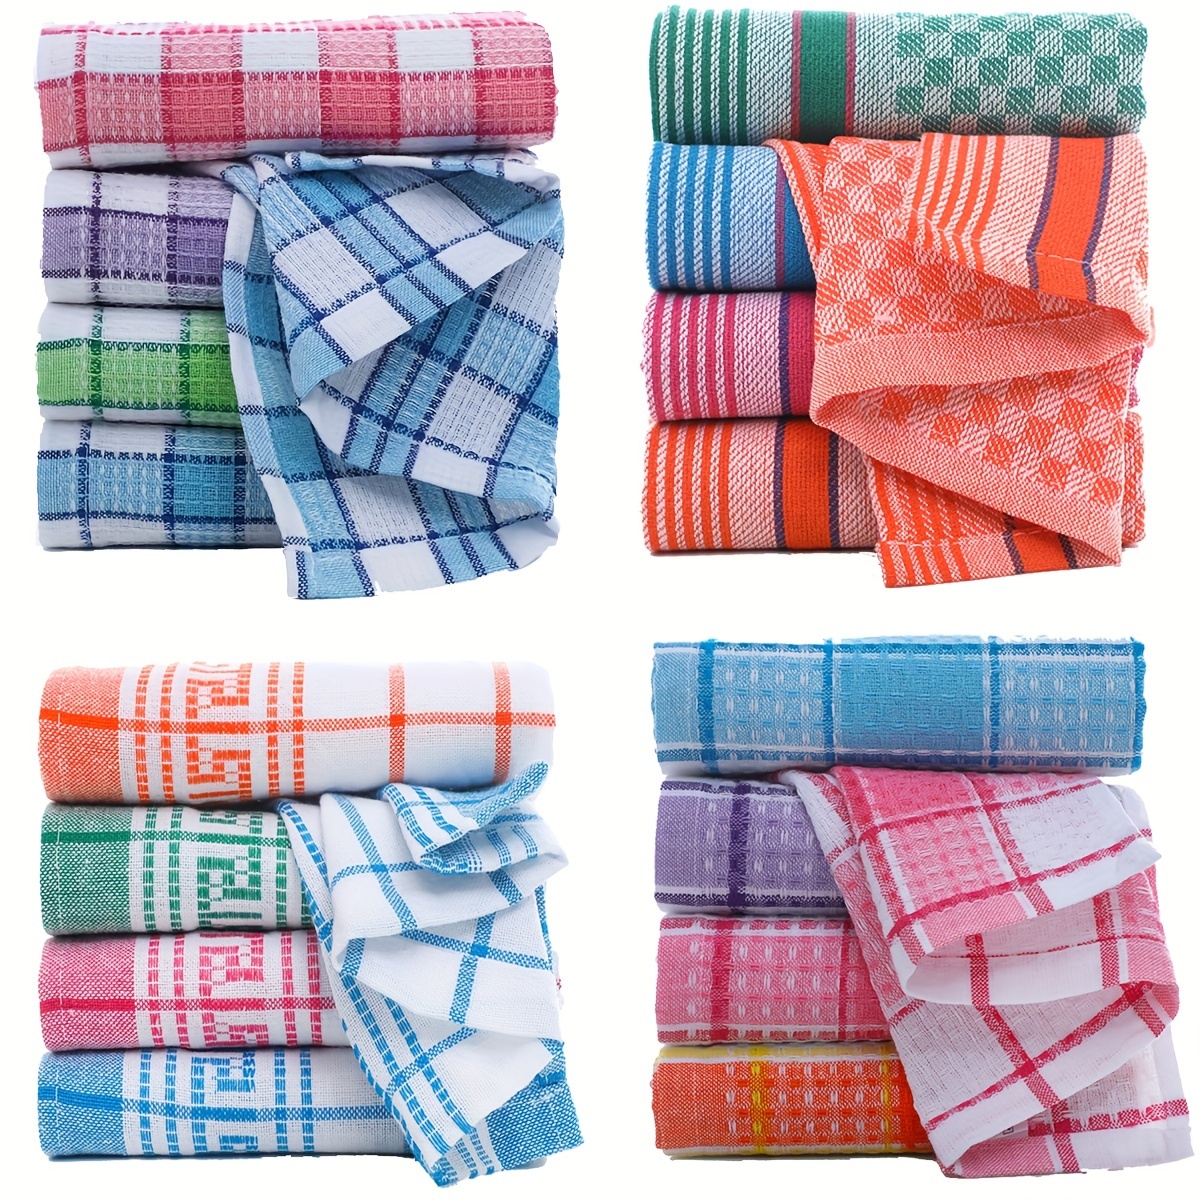 

4-piece Ultra-soft Waffle Weave Cotton Dish Towels - Super Absorbent, Durable Kitchen Cloths For Cleaning & Drying